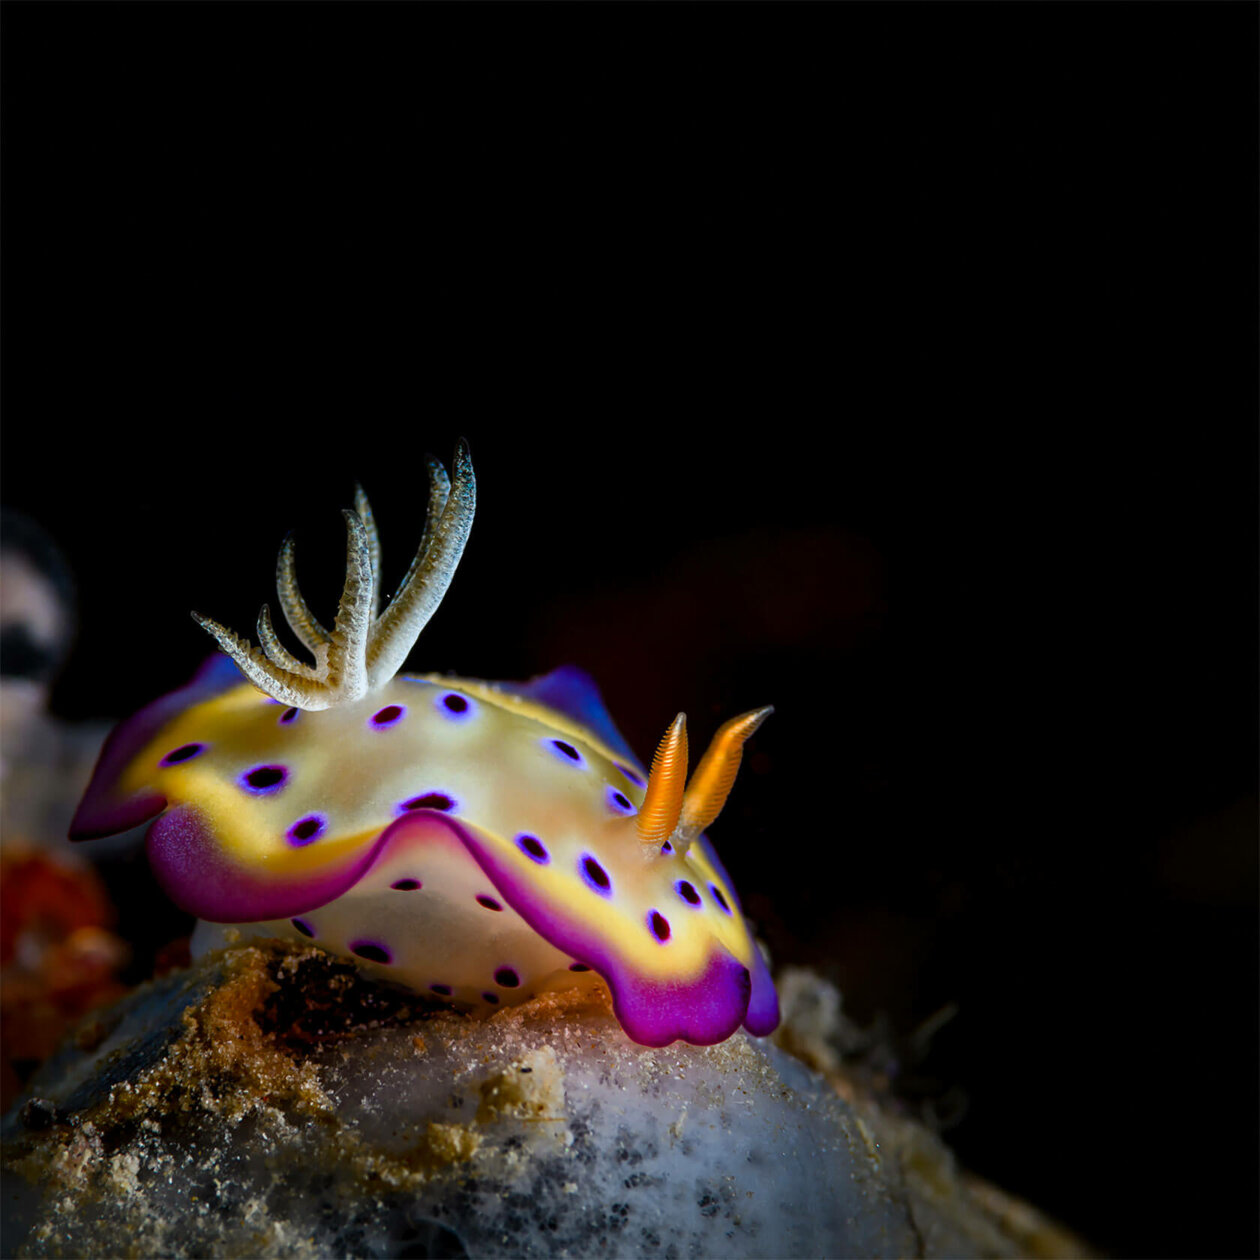 Nudibranchs Gorgeous Pictures Of Sea Slugs By Andrey Savin 2